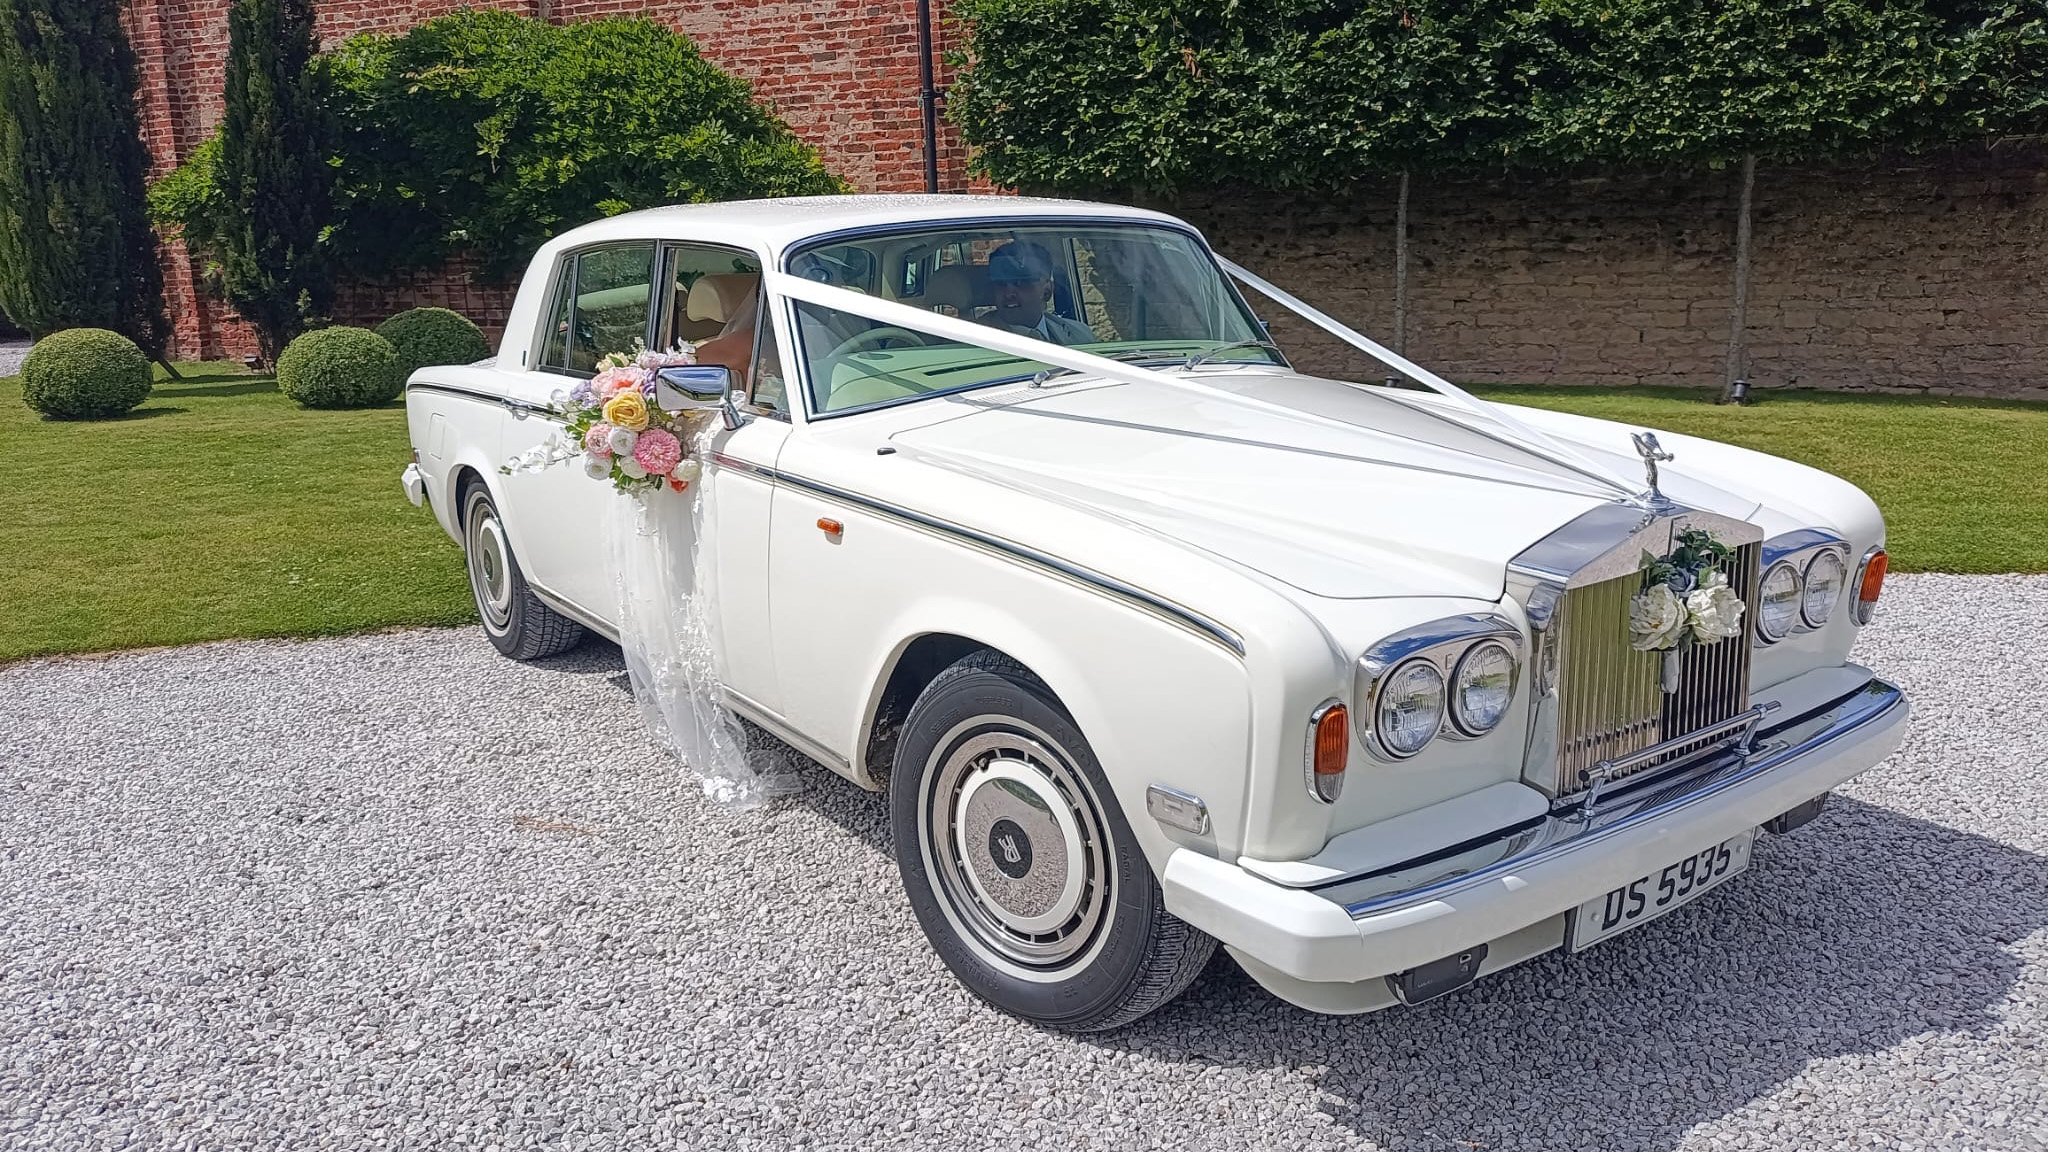 classic White Rolls-Royver silver Shadow decorated with white ribbons and flowers. Bride and Groom can be seen inside the vehicle.